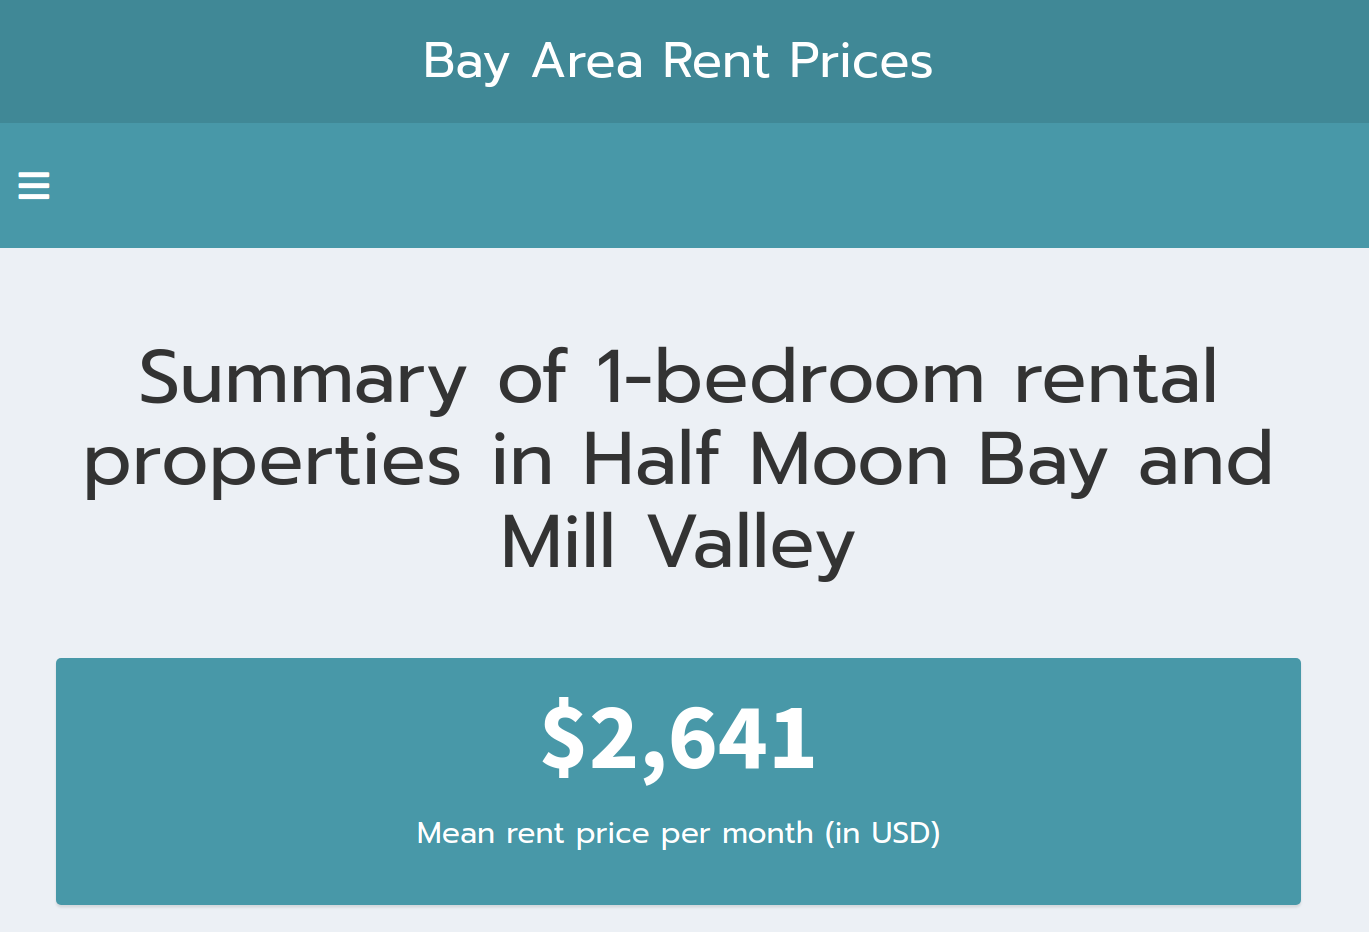 {shinydashboard} with custom Prompt font. Bay Area rent prices withstyling as described with the CSS edits.